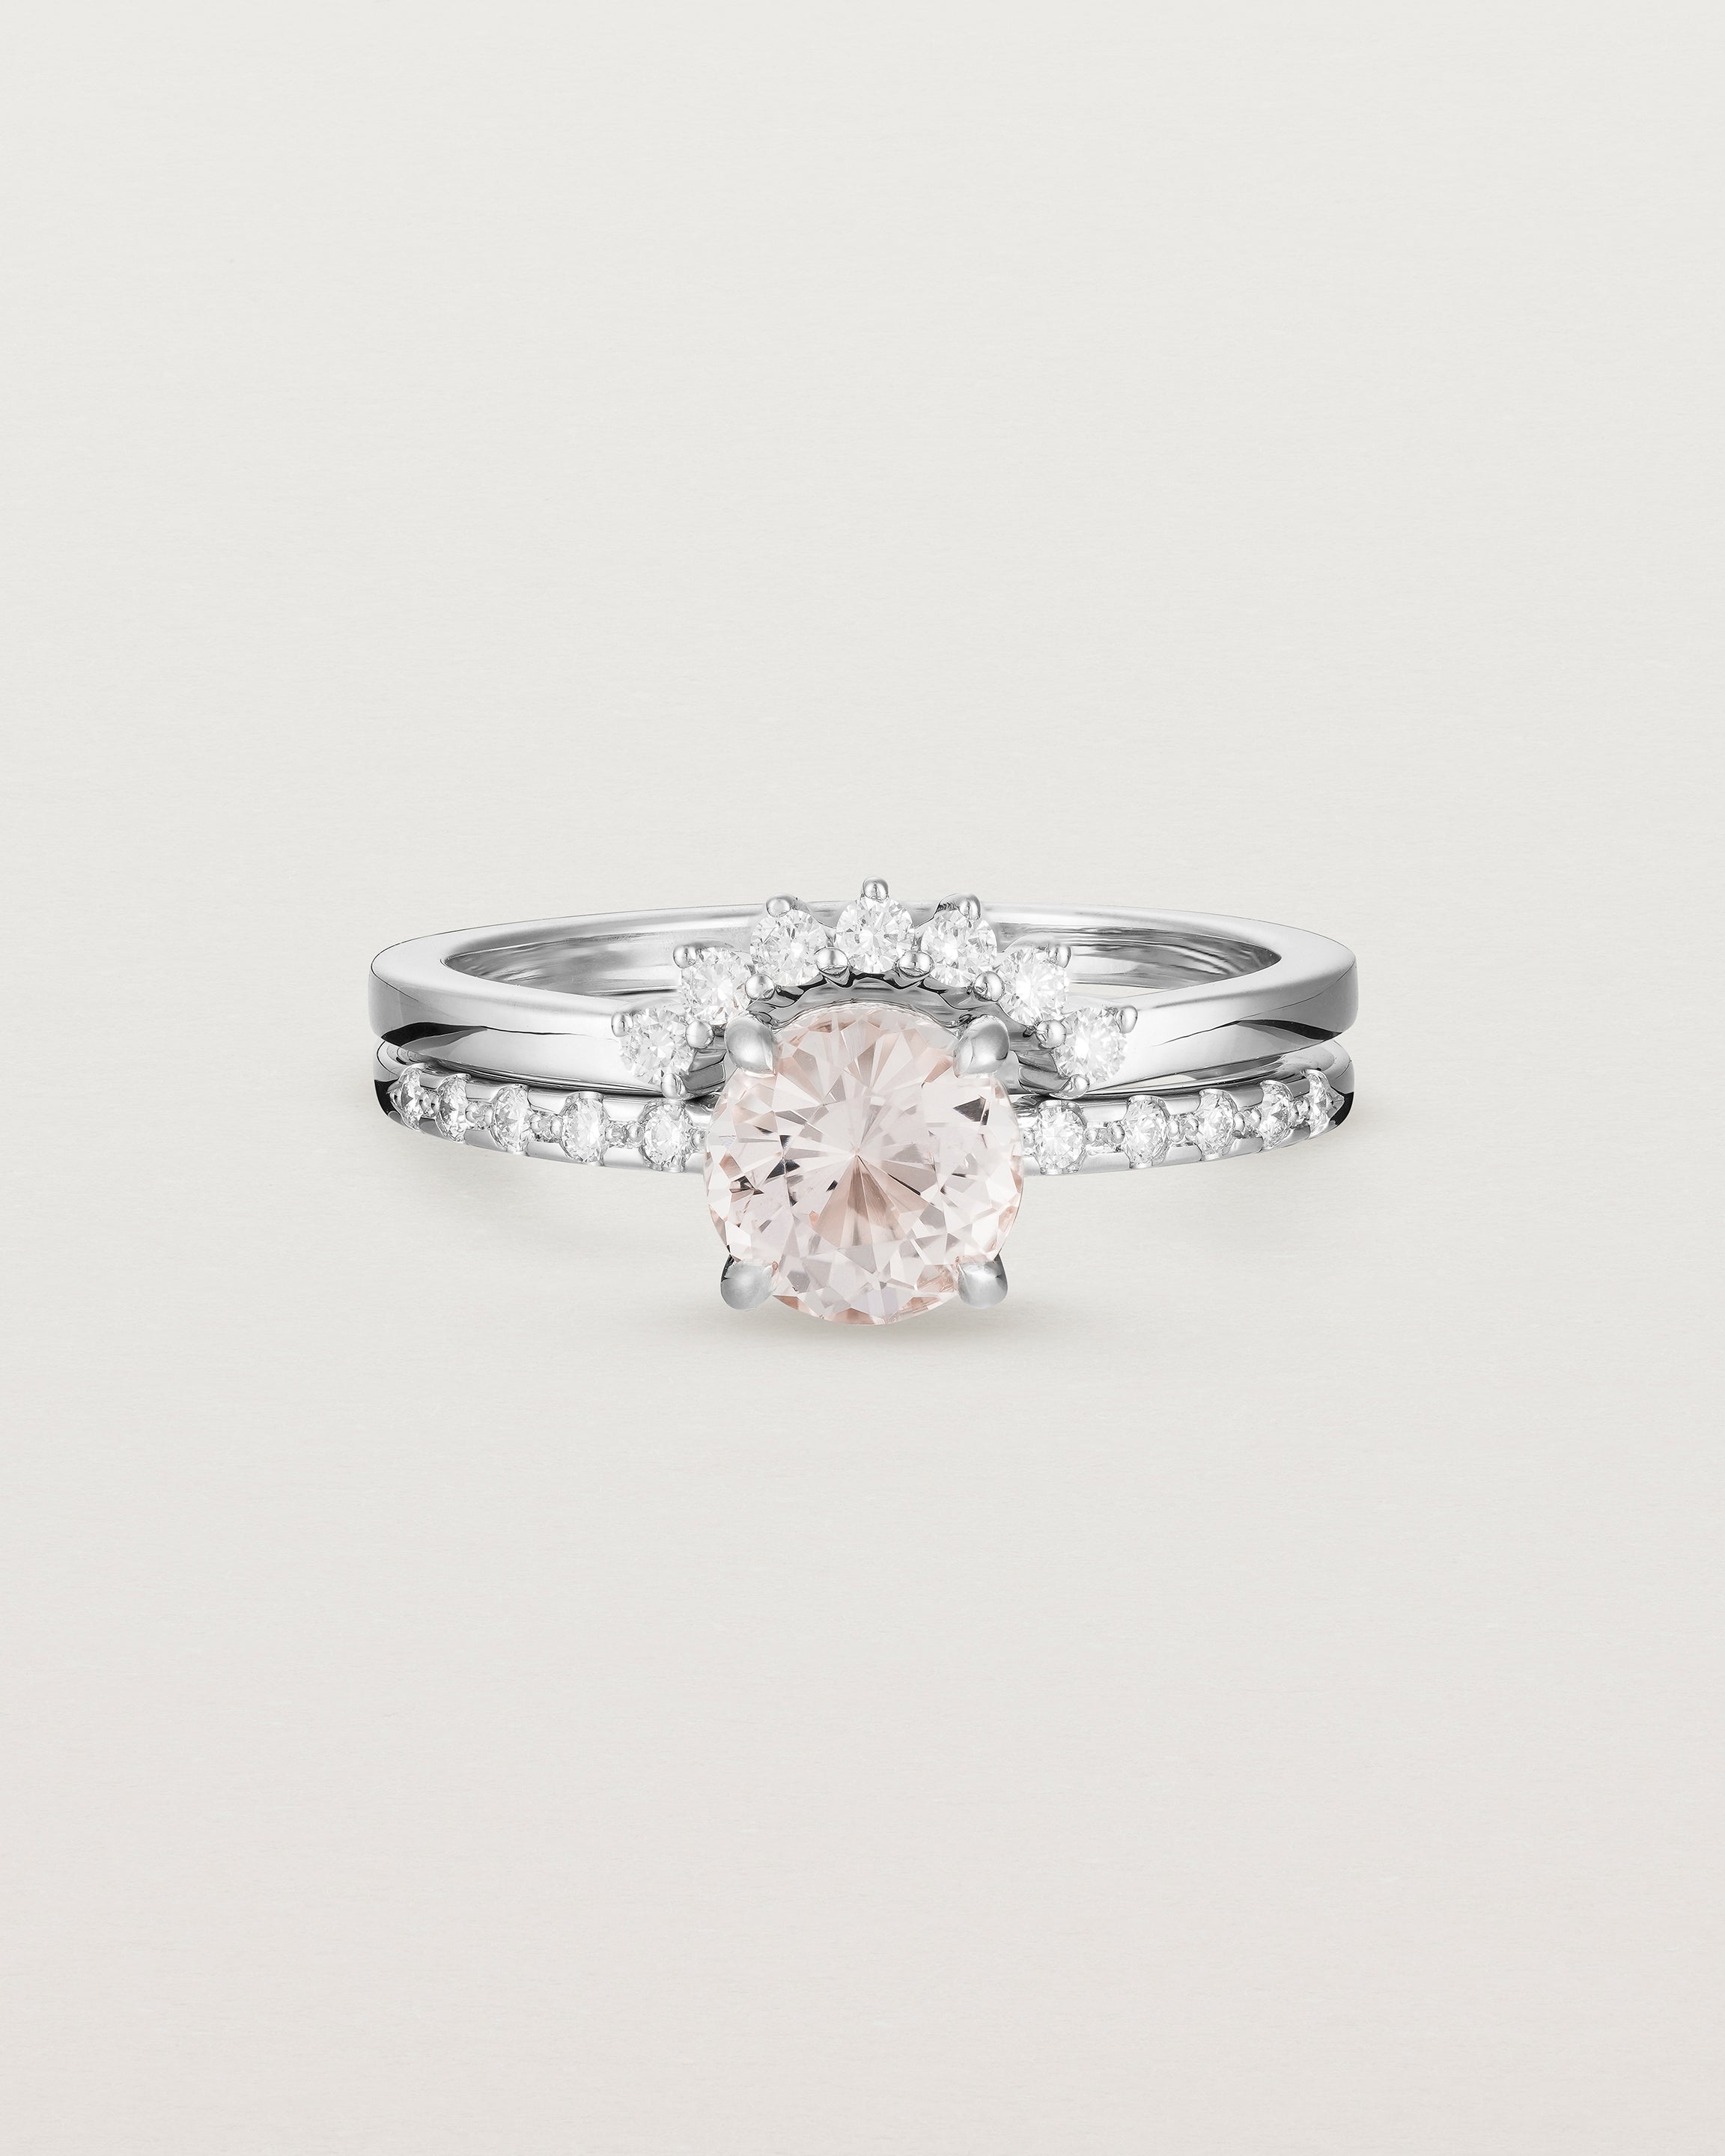 The Petite Una Round Solitaire | Morganite with Cascade Shoulders, stacked with the Reina Crown Ring | Diamonds in White Gold.